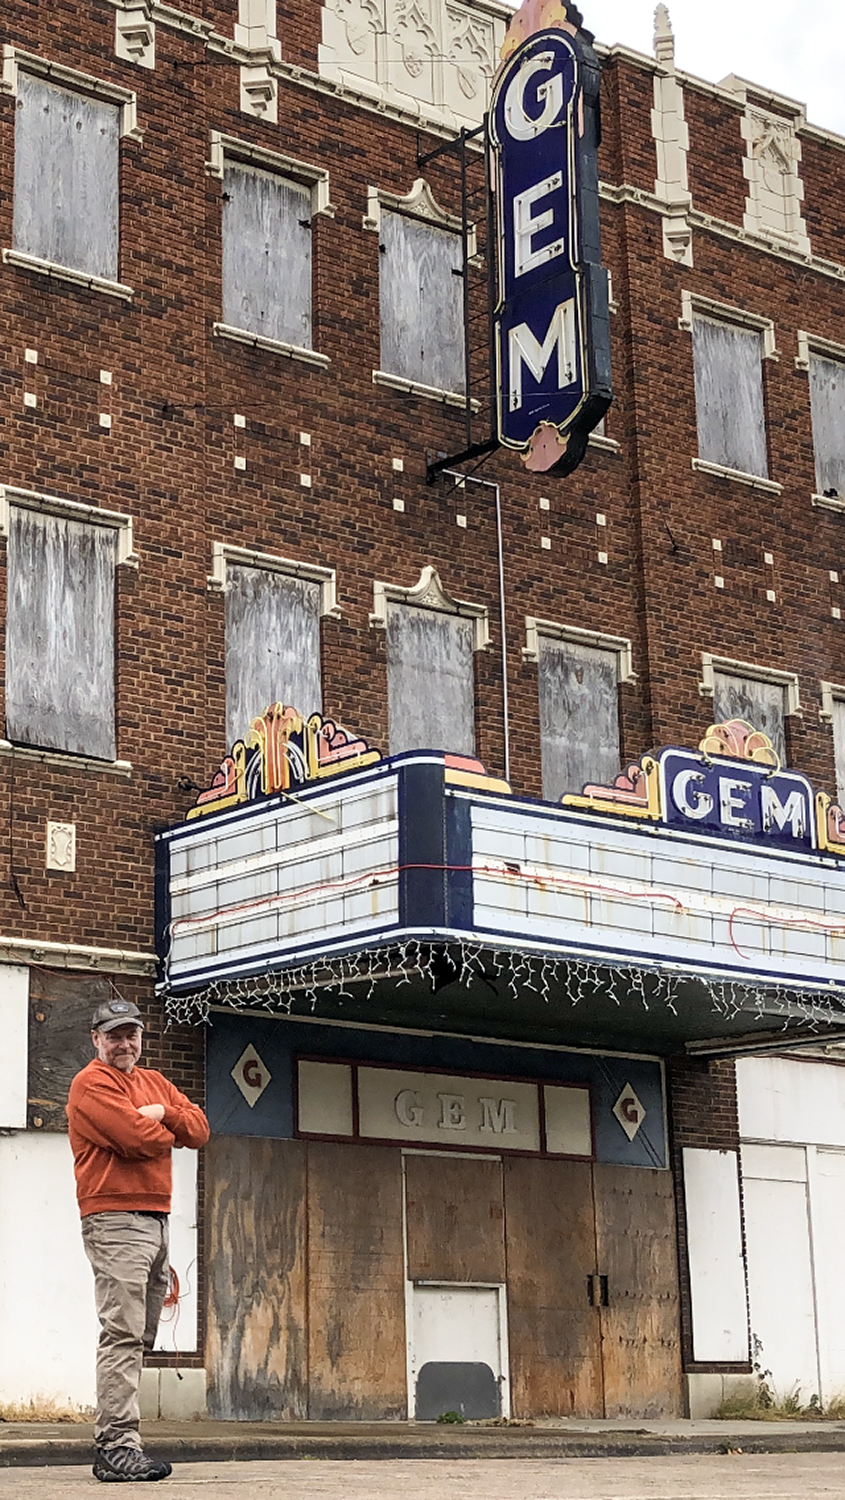 Portrait of photographer Keith Dotson on 7th Street in front of the abandoned Gem Theatre in Cairo Illinois.